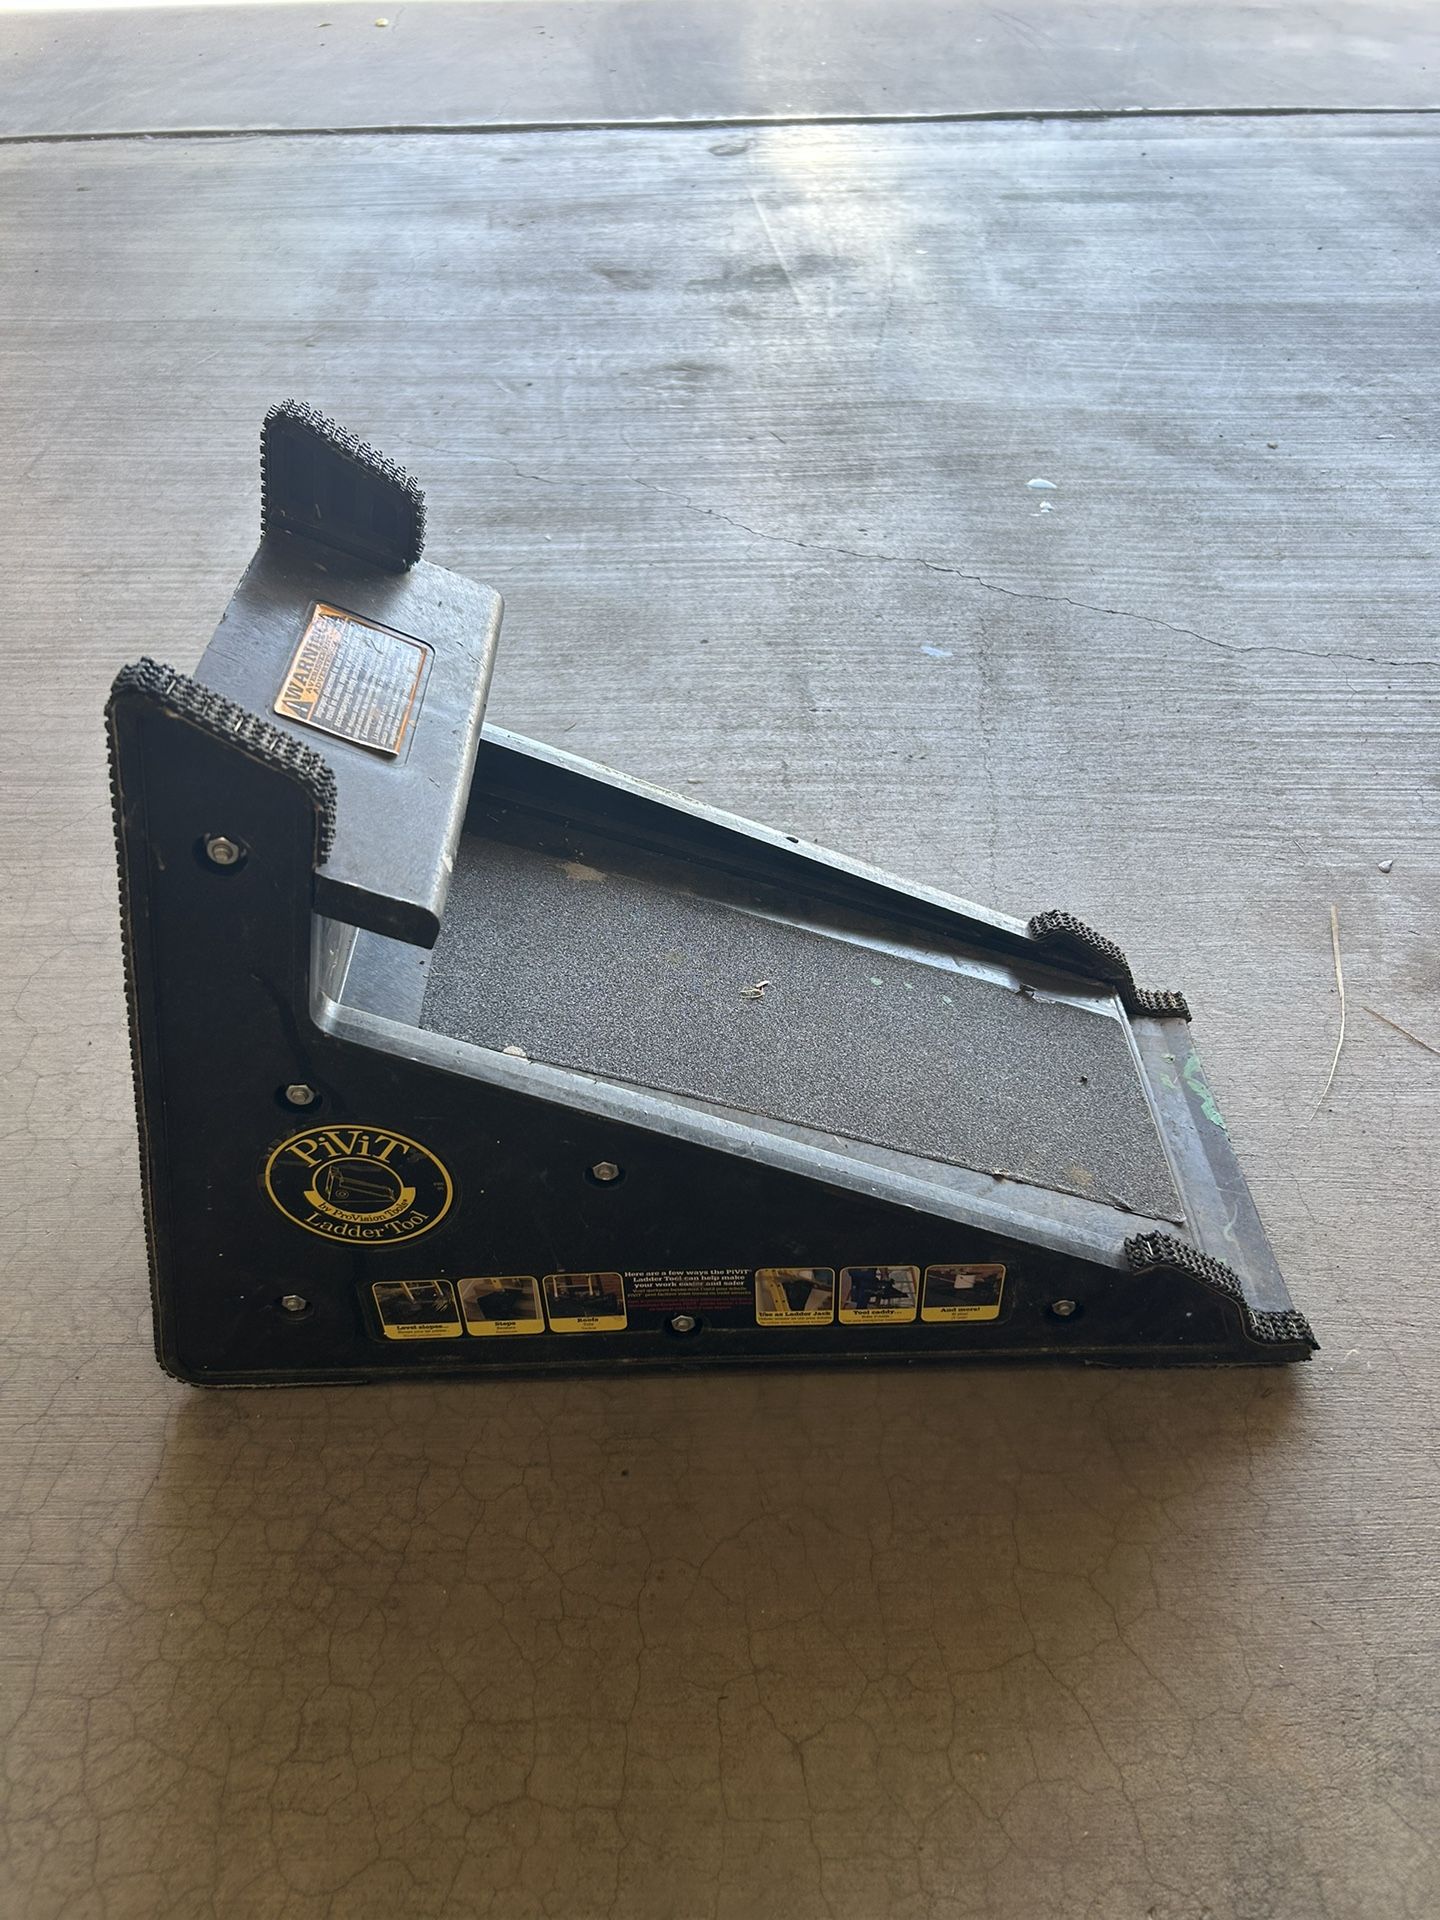 PIVIT LADDER TOOL IN GOOD CONDITION!!